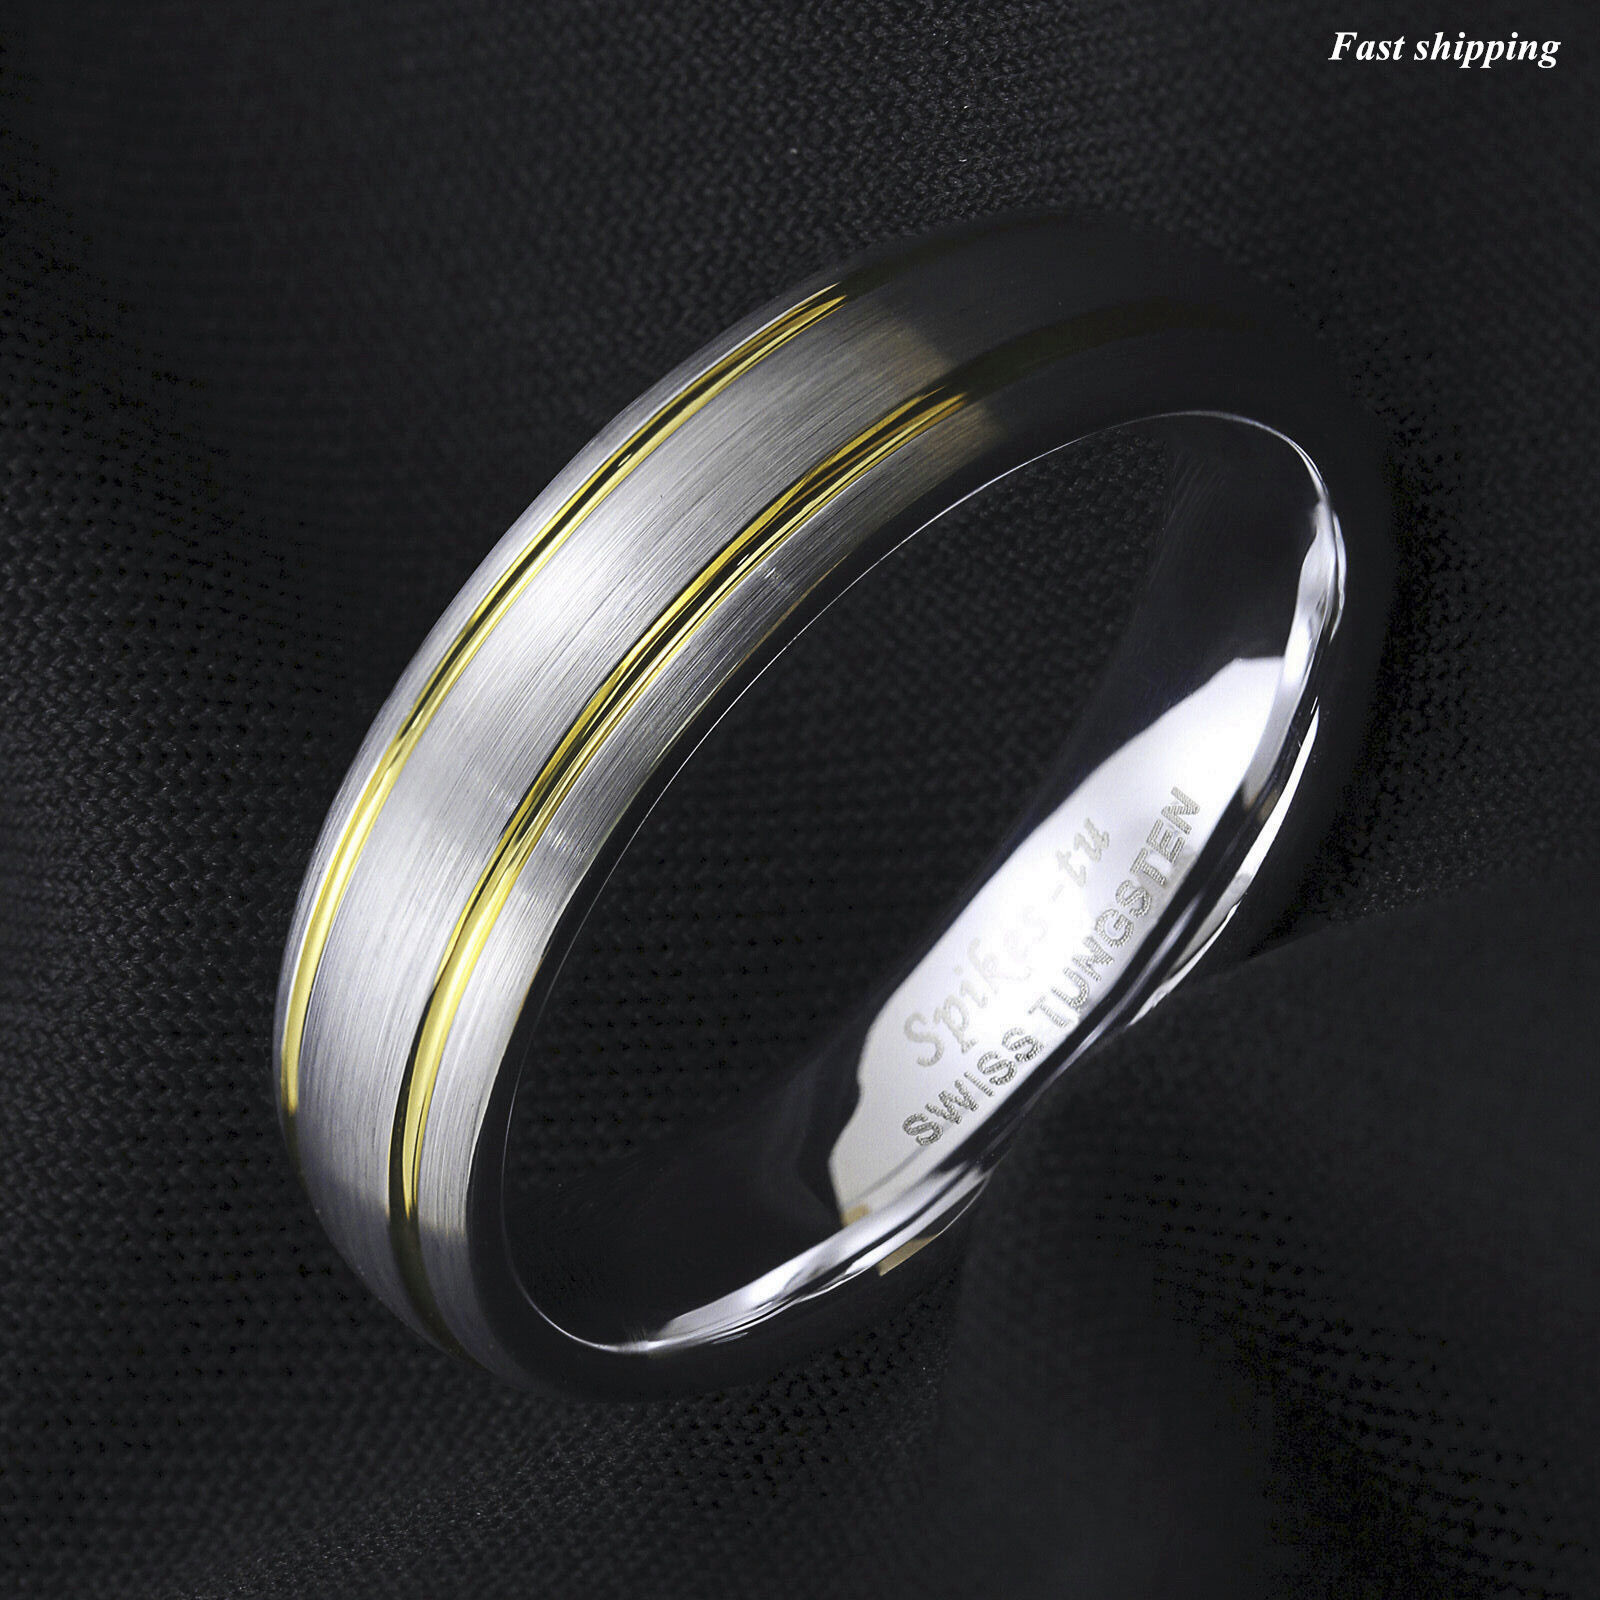 What are the advantages of tungsten steel jewelry?